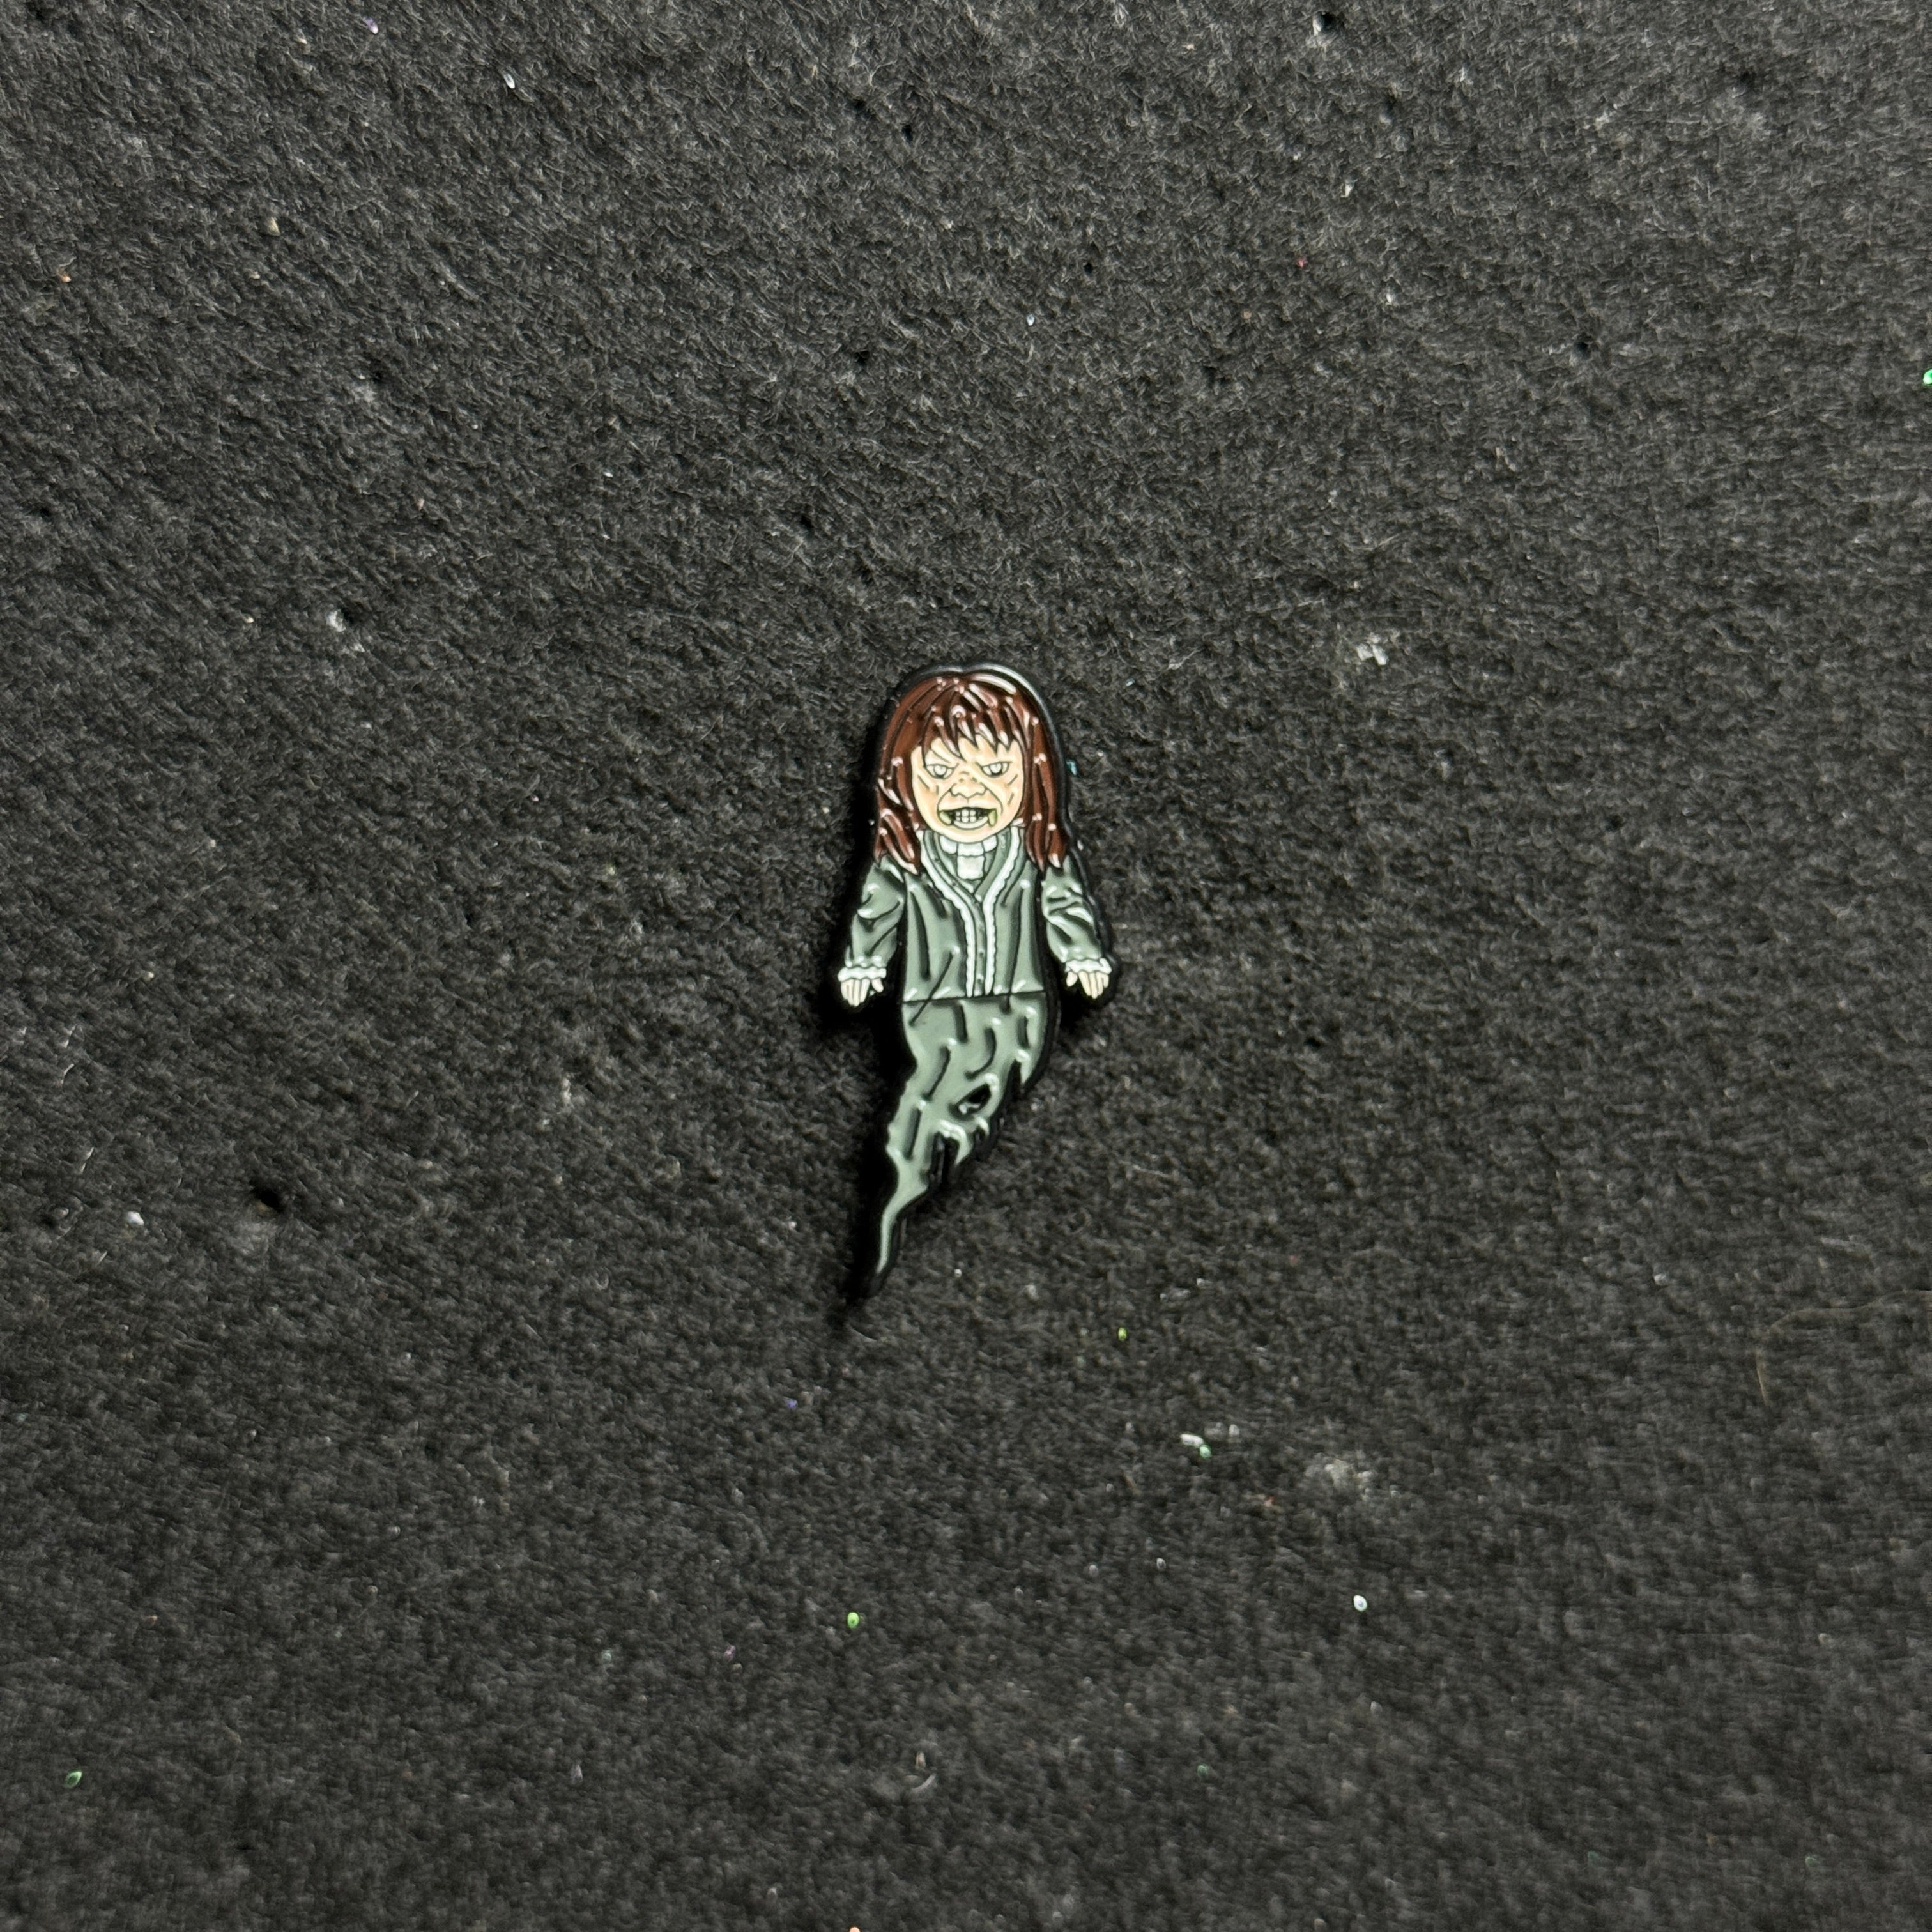 Horrifying Scary Girl Ghost Graphic Pin